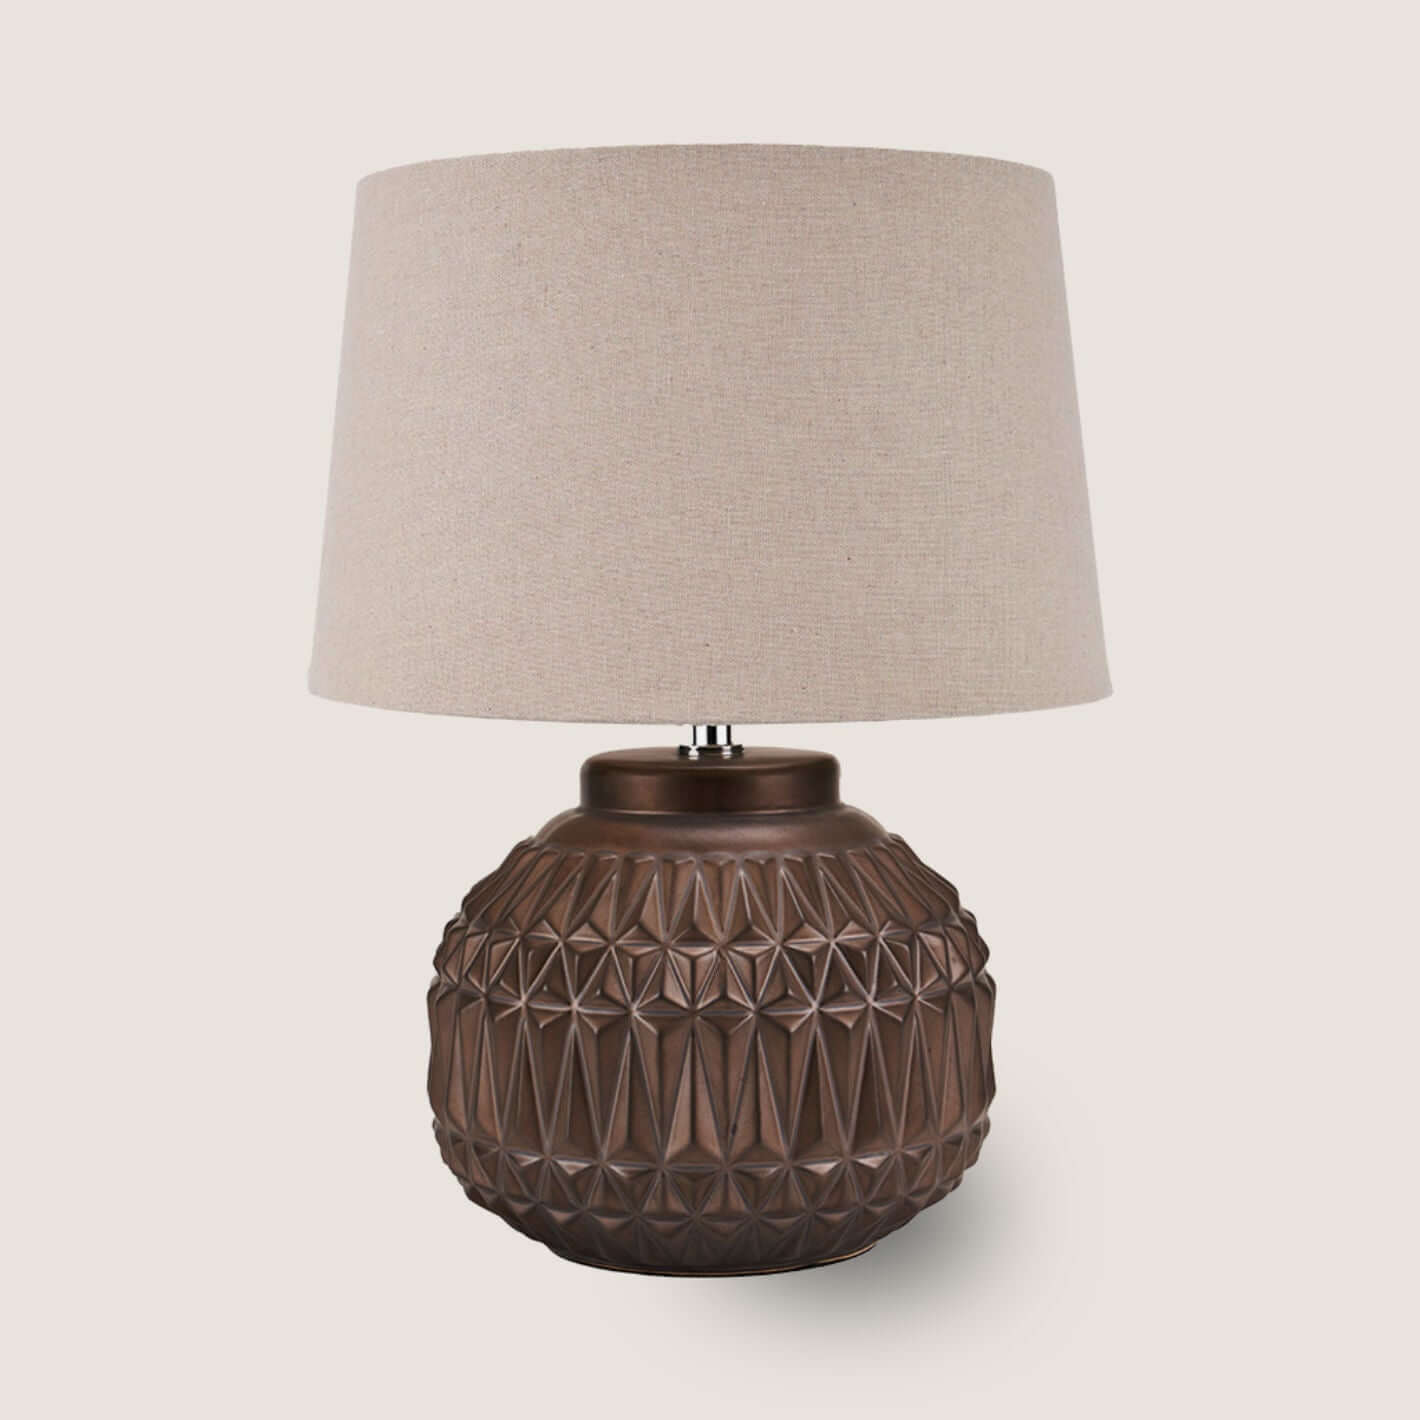 Onora Table Lamp